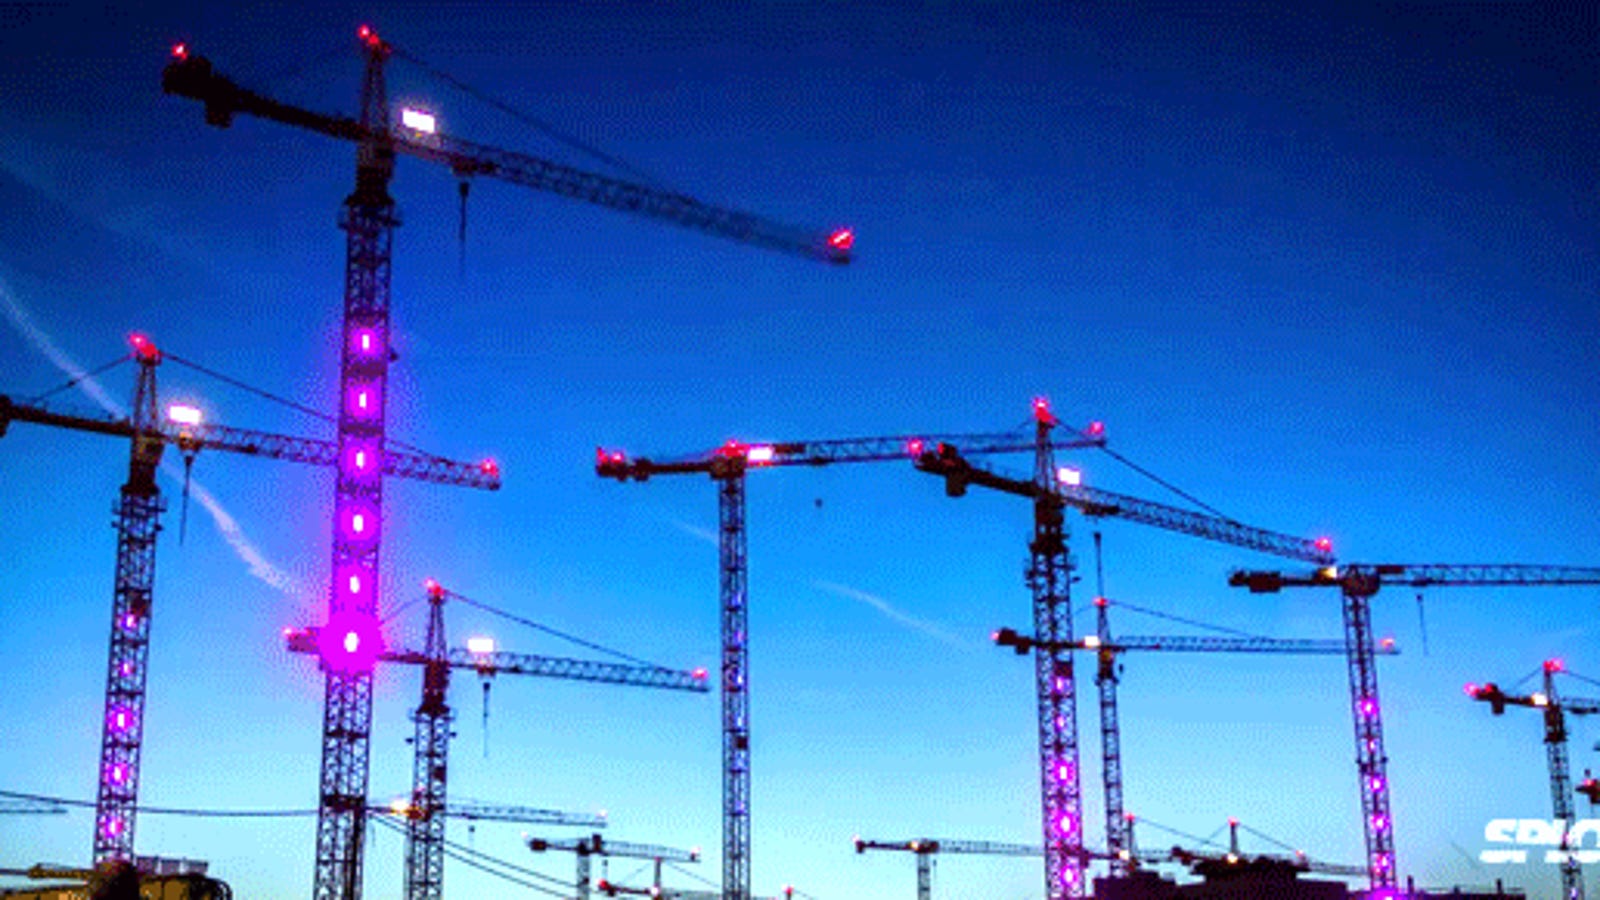 Watch construction cranes come to life and dance in a fun light show